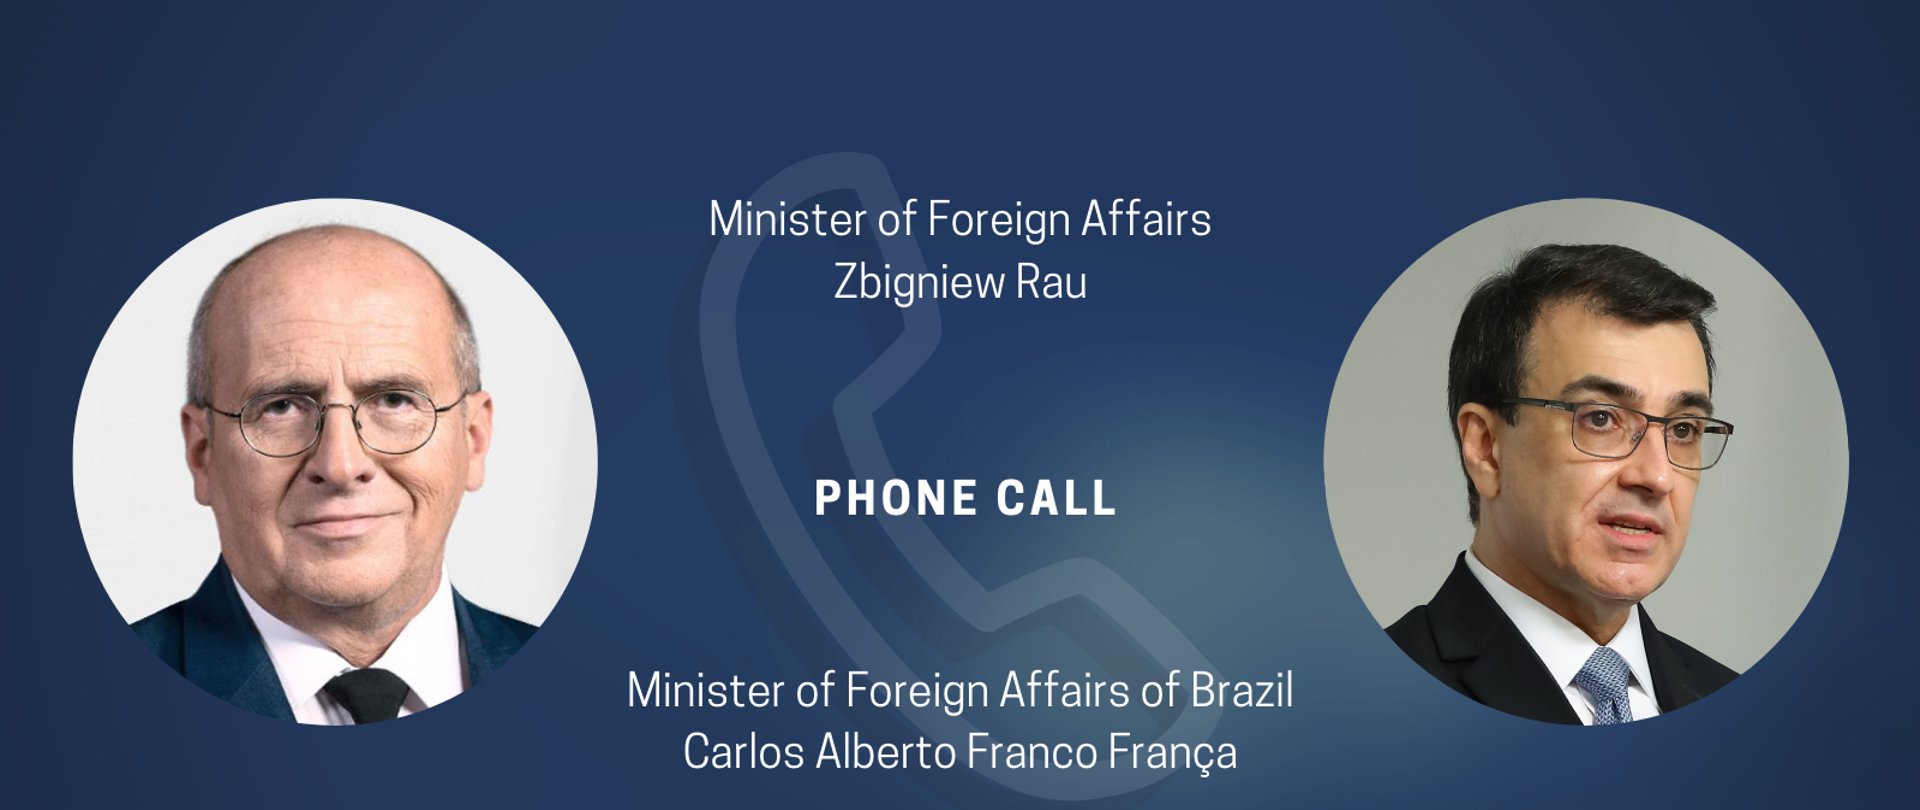 Foreign Minister Zbigniew Rau spoke on the phone with his Brazilian counterpart Carlos França